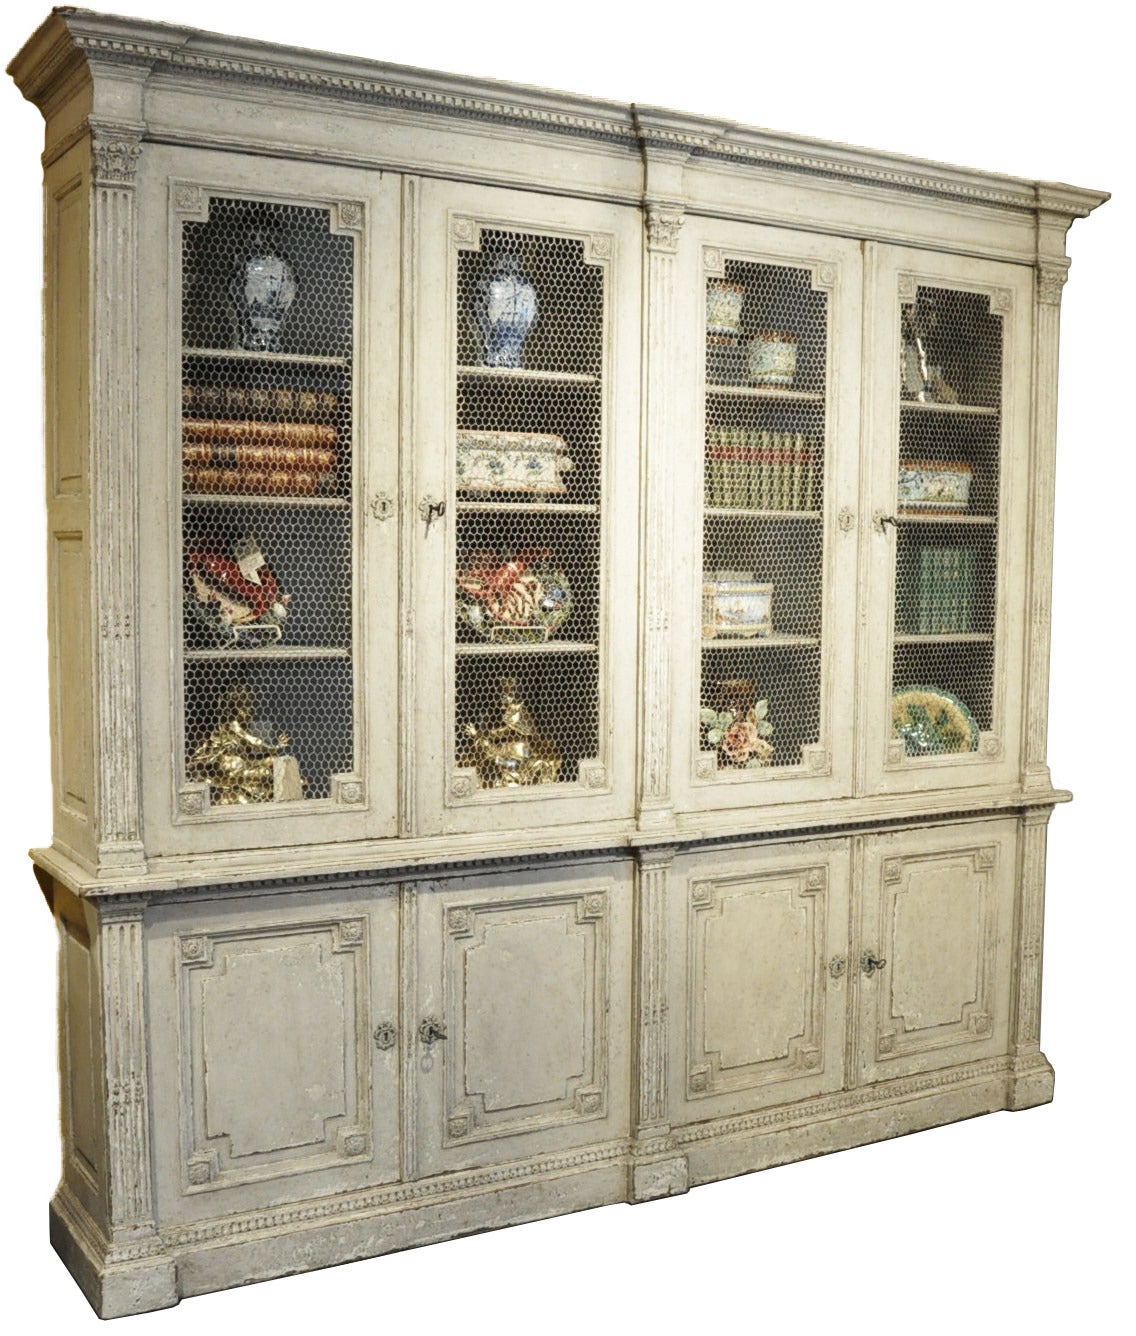 Elegant mid-19th century Louis XVI painted bookcase featuring two chicken wire double doors on top with plenty of shelving for display, circa 1840. On the bottom, there is a pair of carved doors with shelving for storage. The beautiful painted